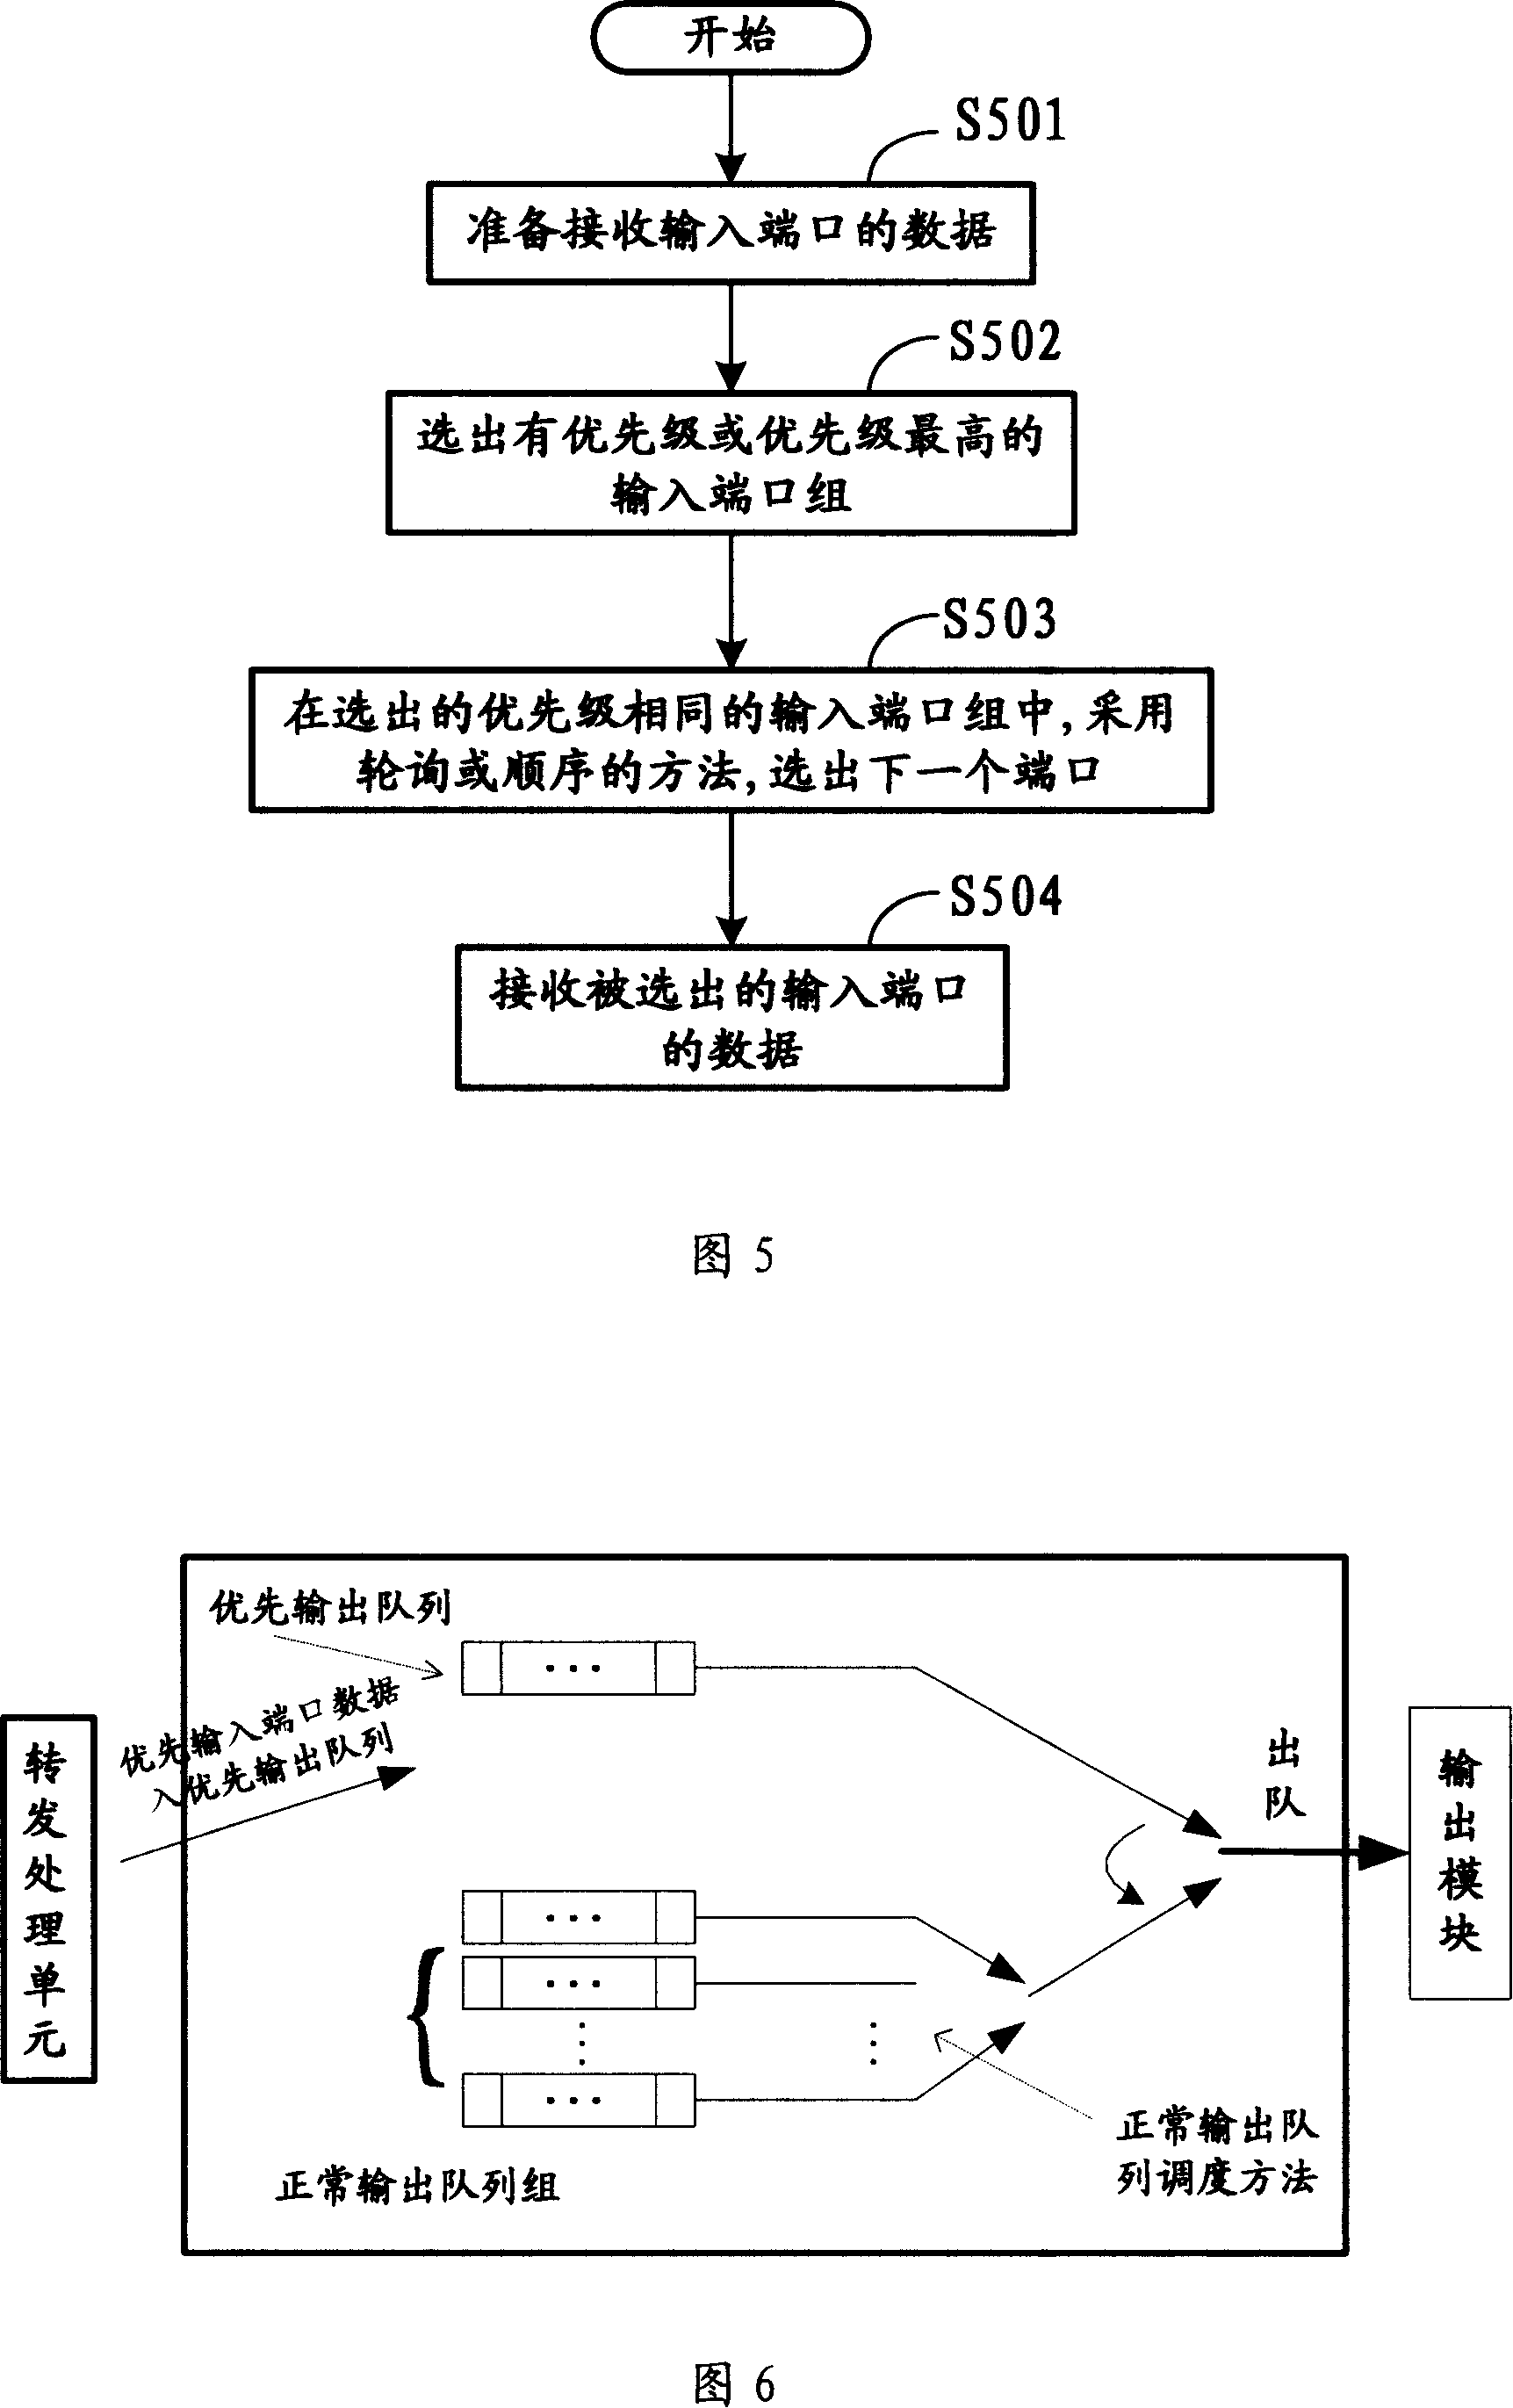 A network data processing method and device